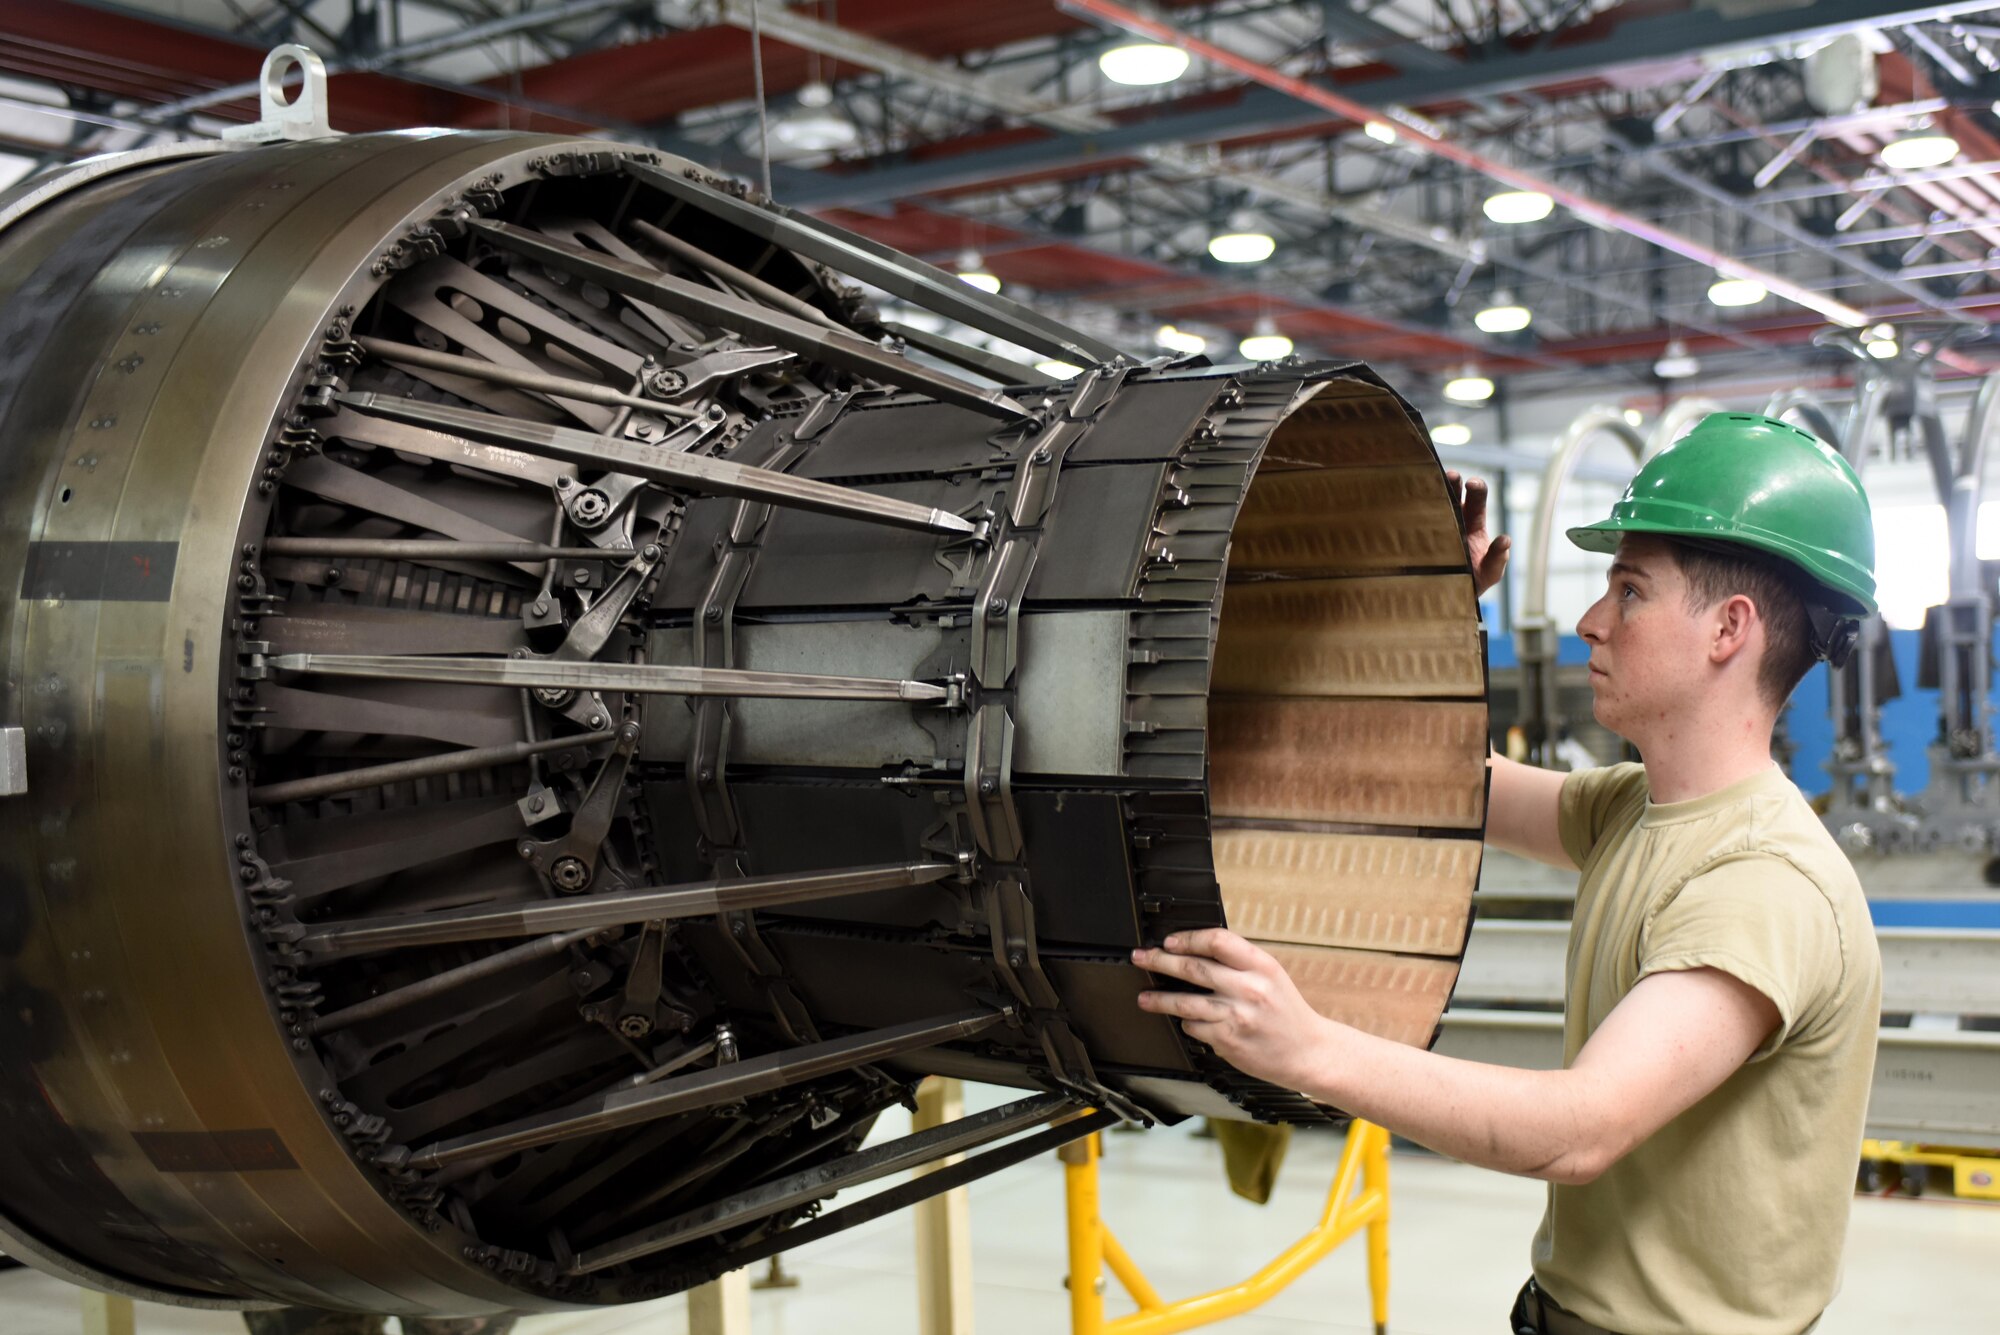 An Airman assigned to the 48th Component Maintenance Squadron maneuvers an F-15 engine at Royal Air Force Lakenheath, England, June 13. The 48th CMS is responsible for the installation’s propulsions shop, where maintenance is performed on F-15 engines. (U.S. Air Force photo/Airman 1st Class Eli Chevalier) 